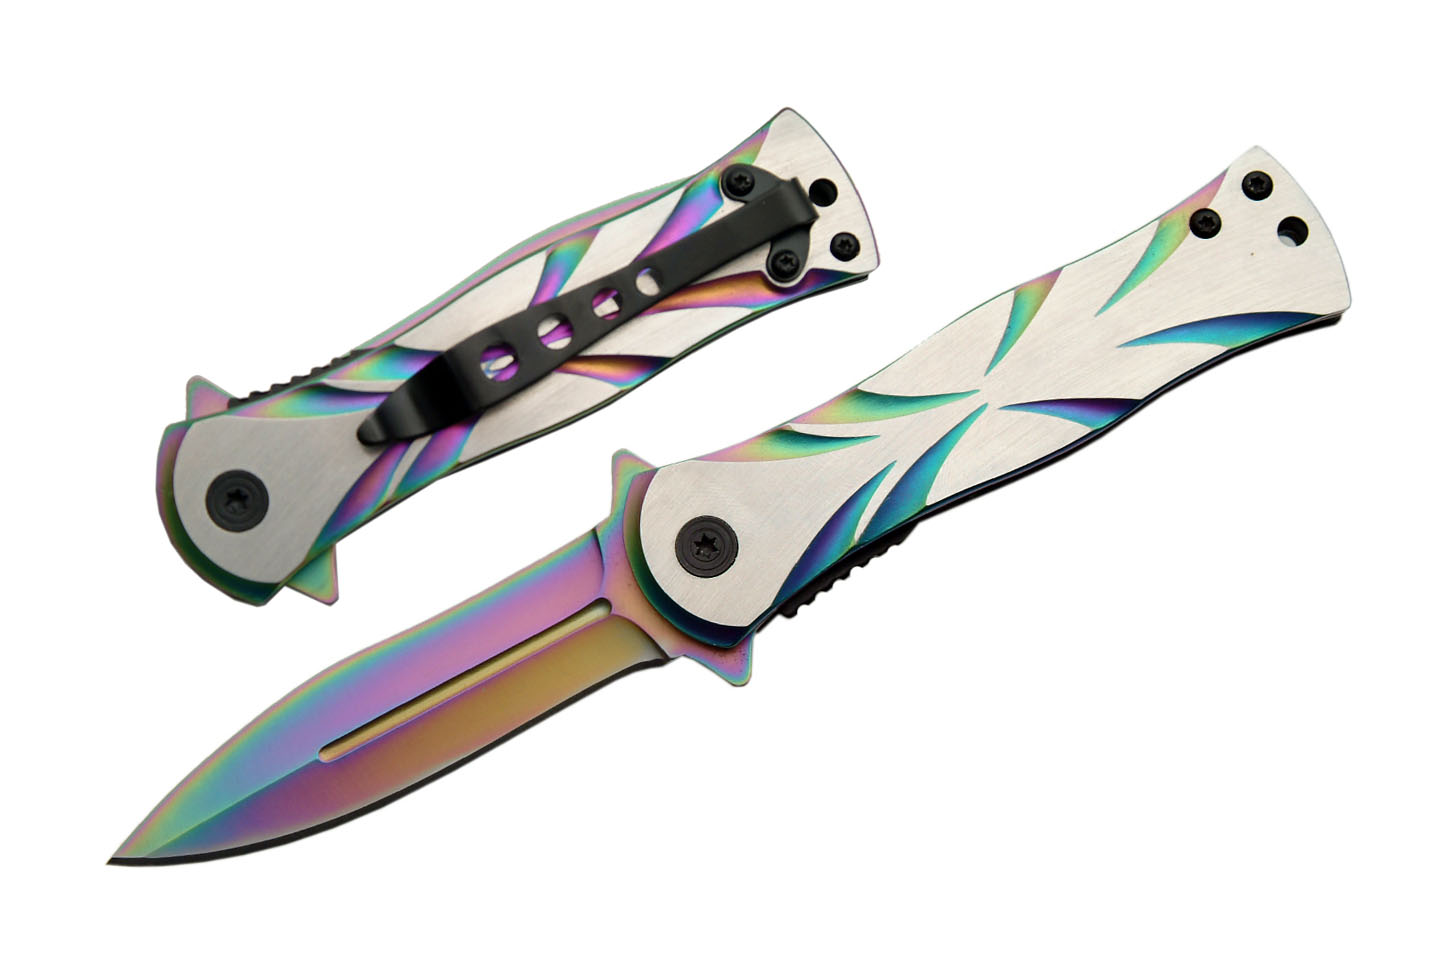 Spring-Assist Folding Knife 7in. Overall Rainbow Silver Diamond Stiletto Blade